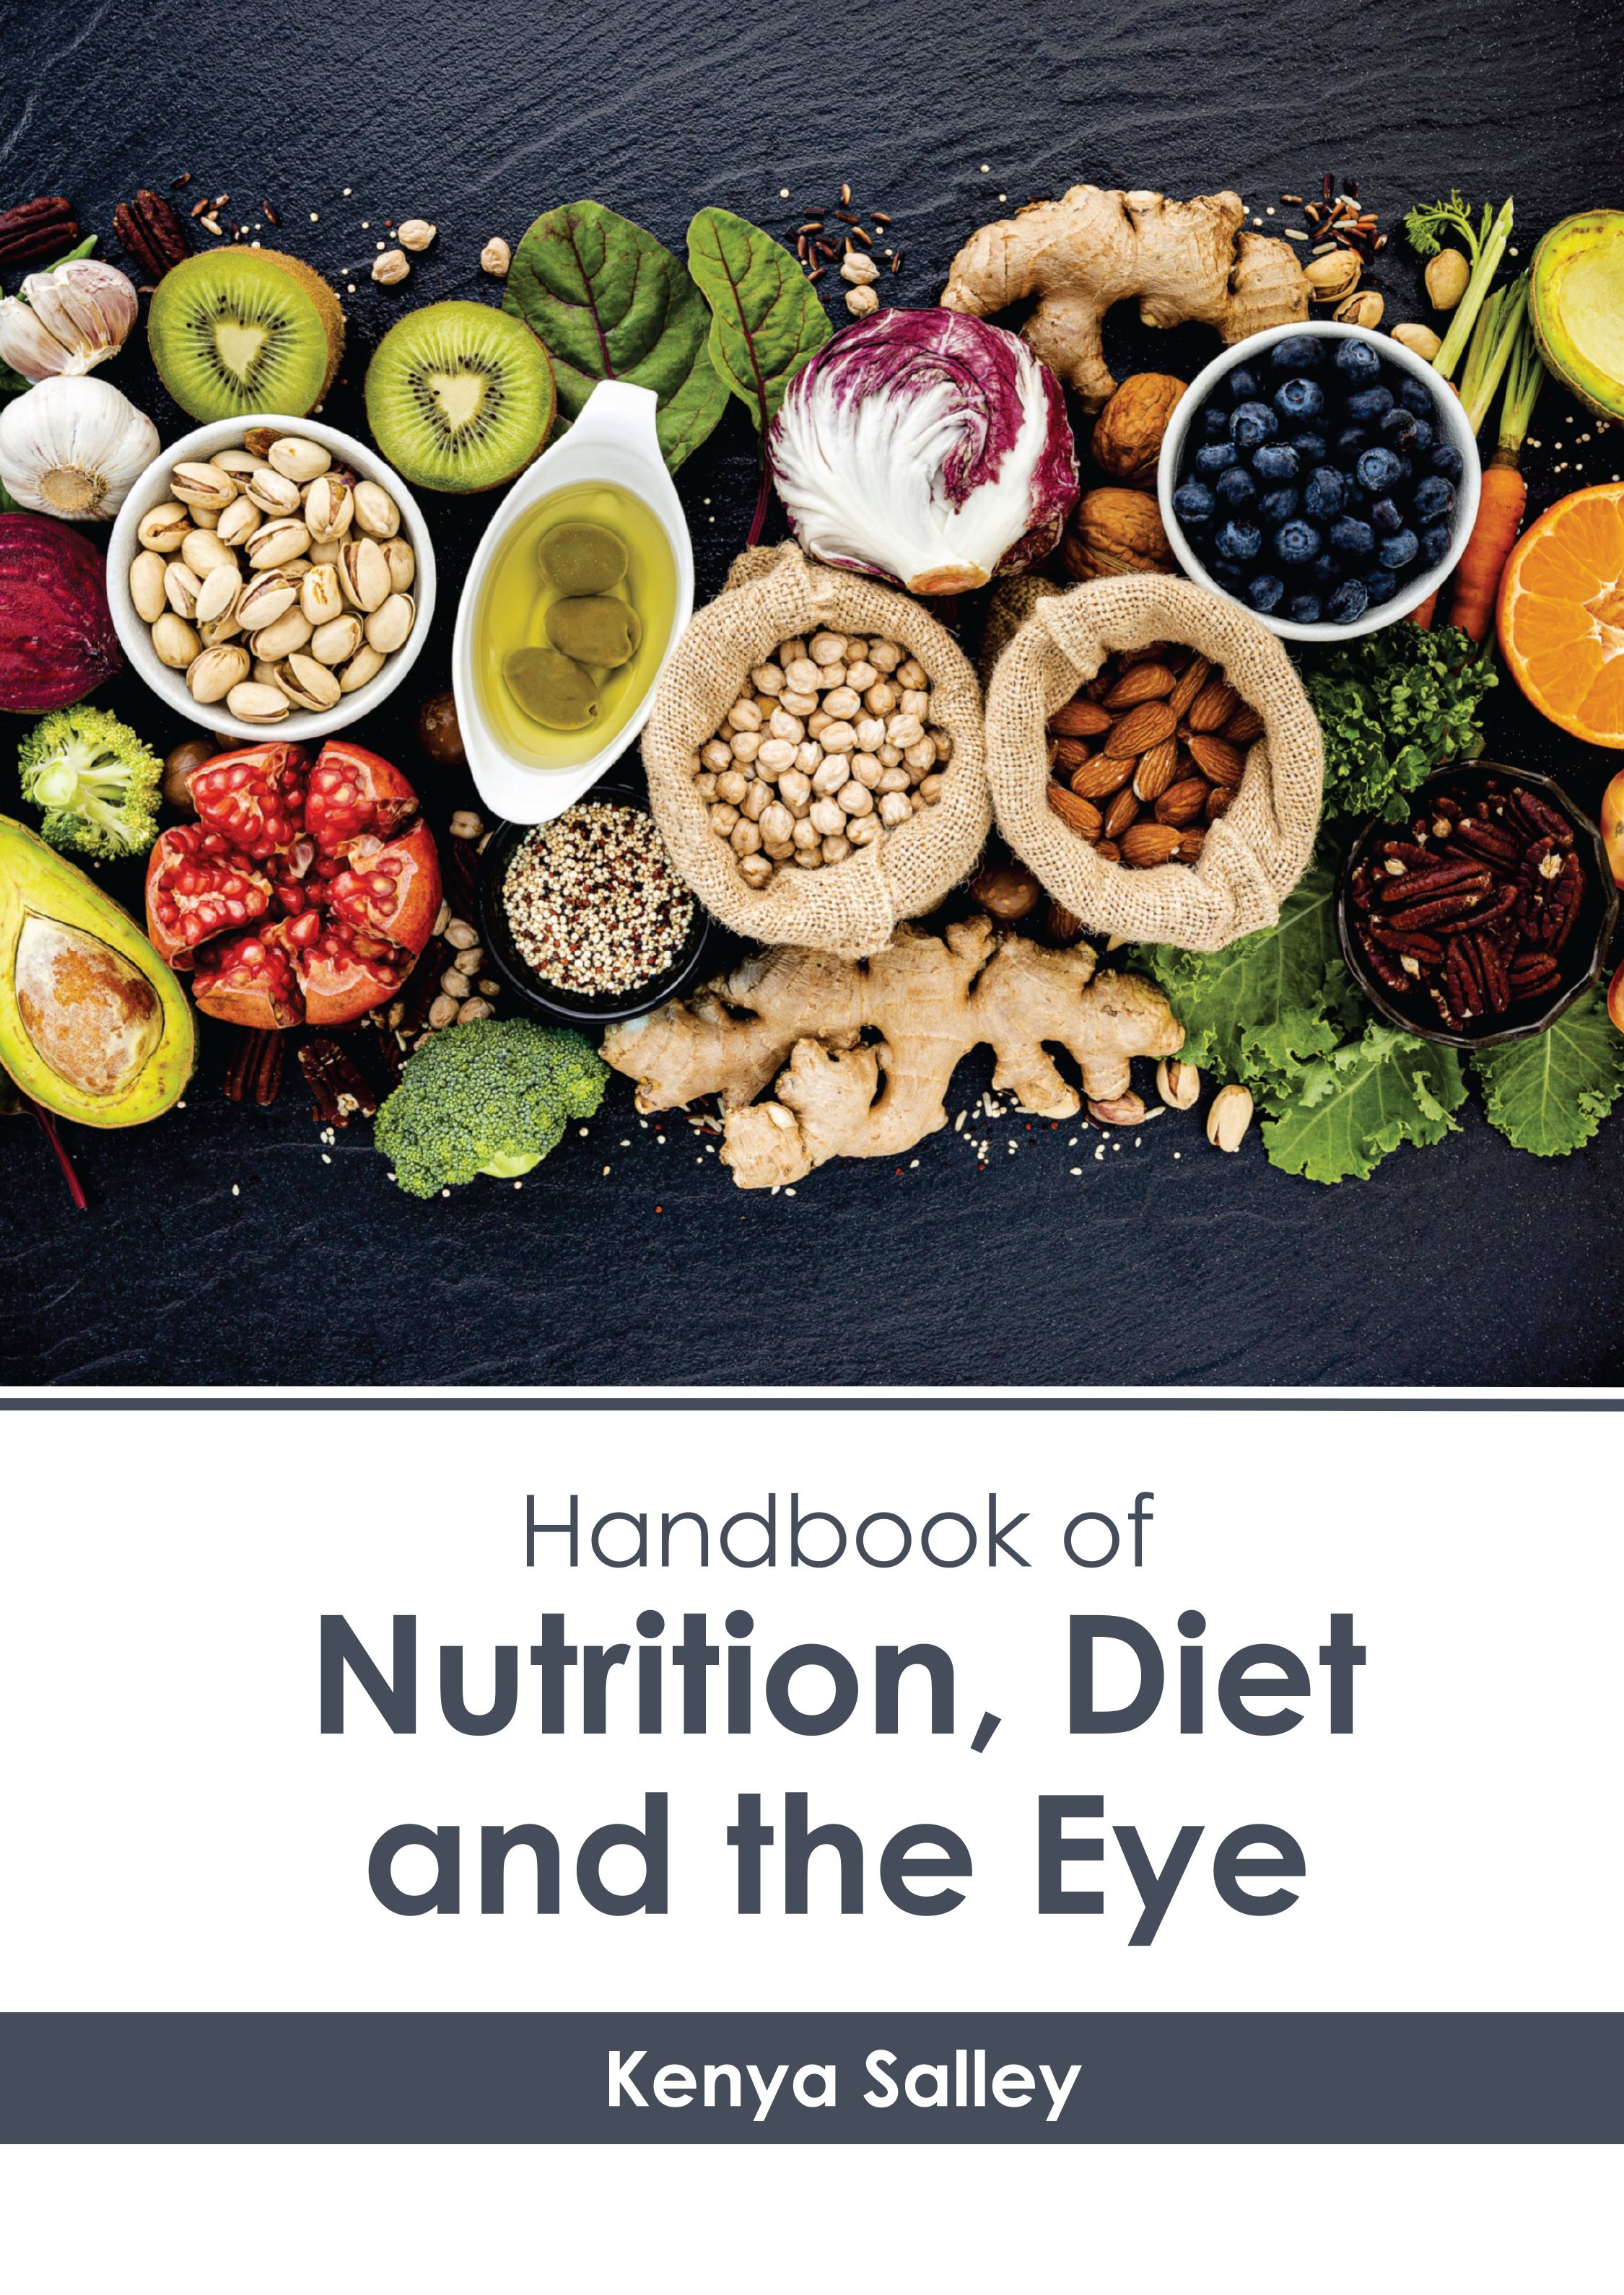 

medical-reference-books/ophthalmology/handbook-of-nutrition-diet-and-the-eye-9781639276868